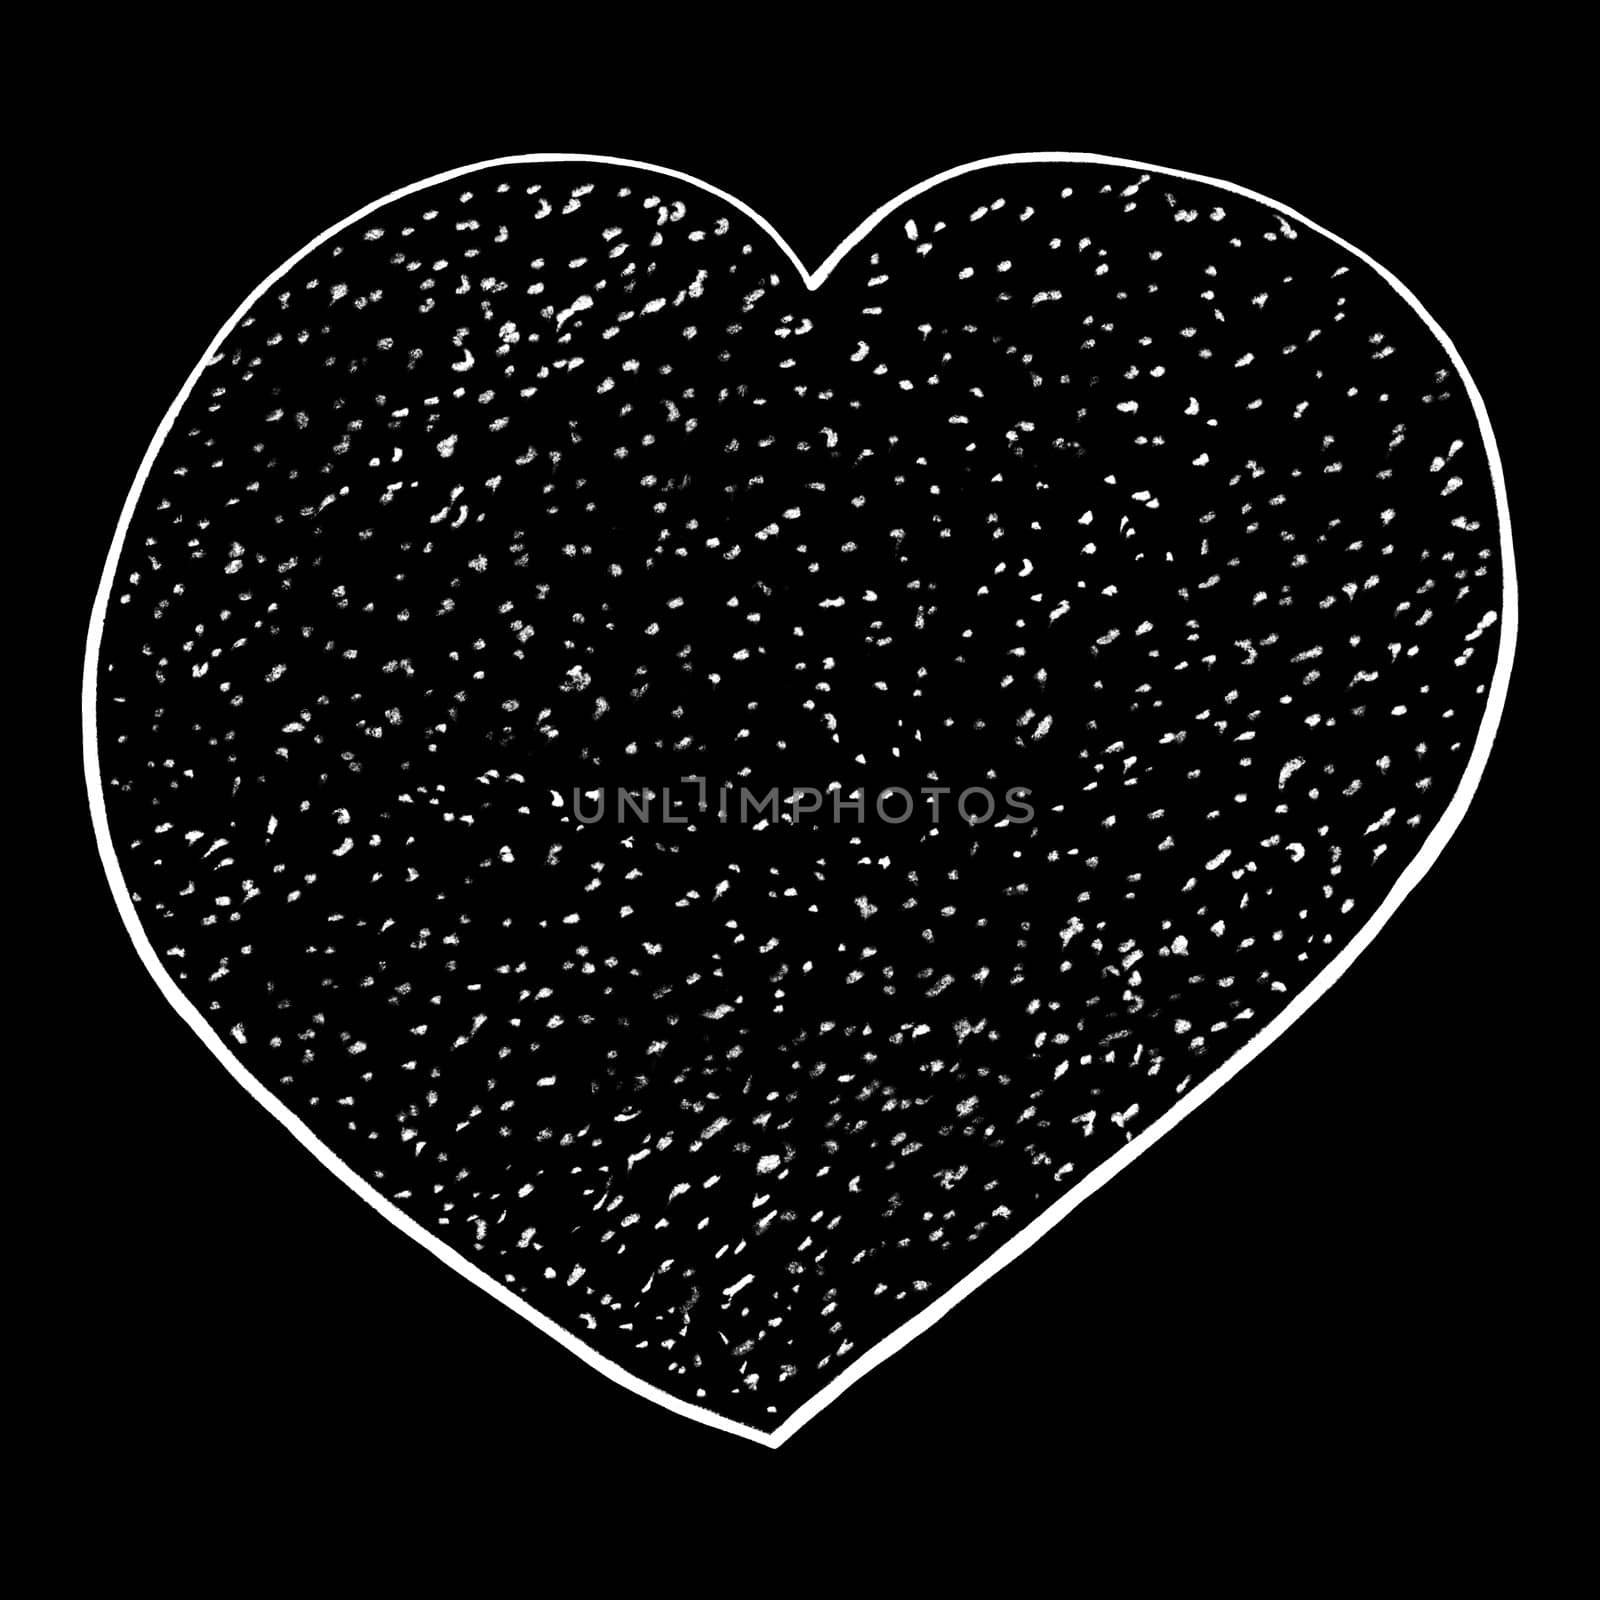 White Heart Drawn by Colored Pencil. Heart Shape Isolated on Black Background. by Rina_Dozornaya